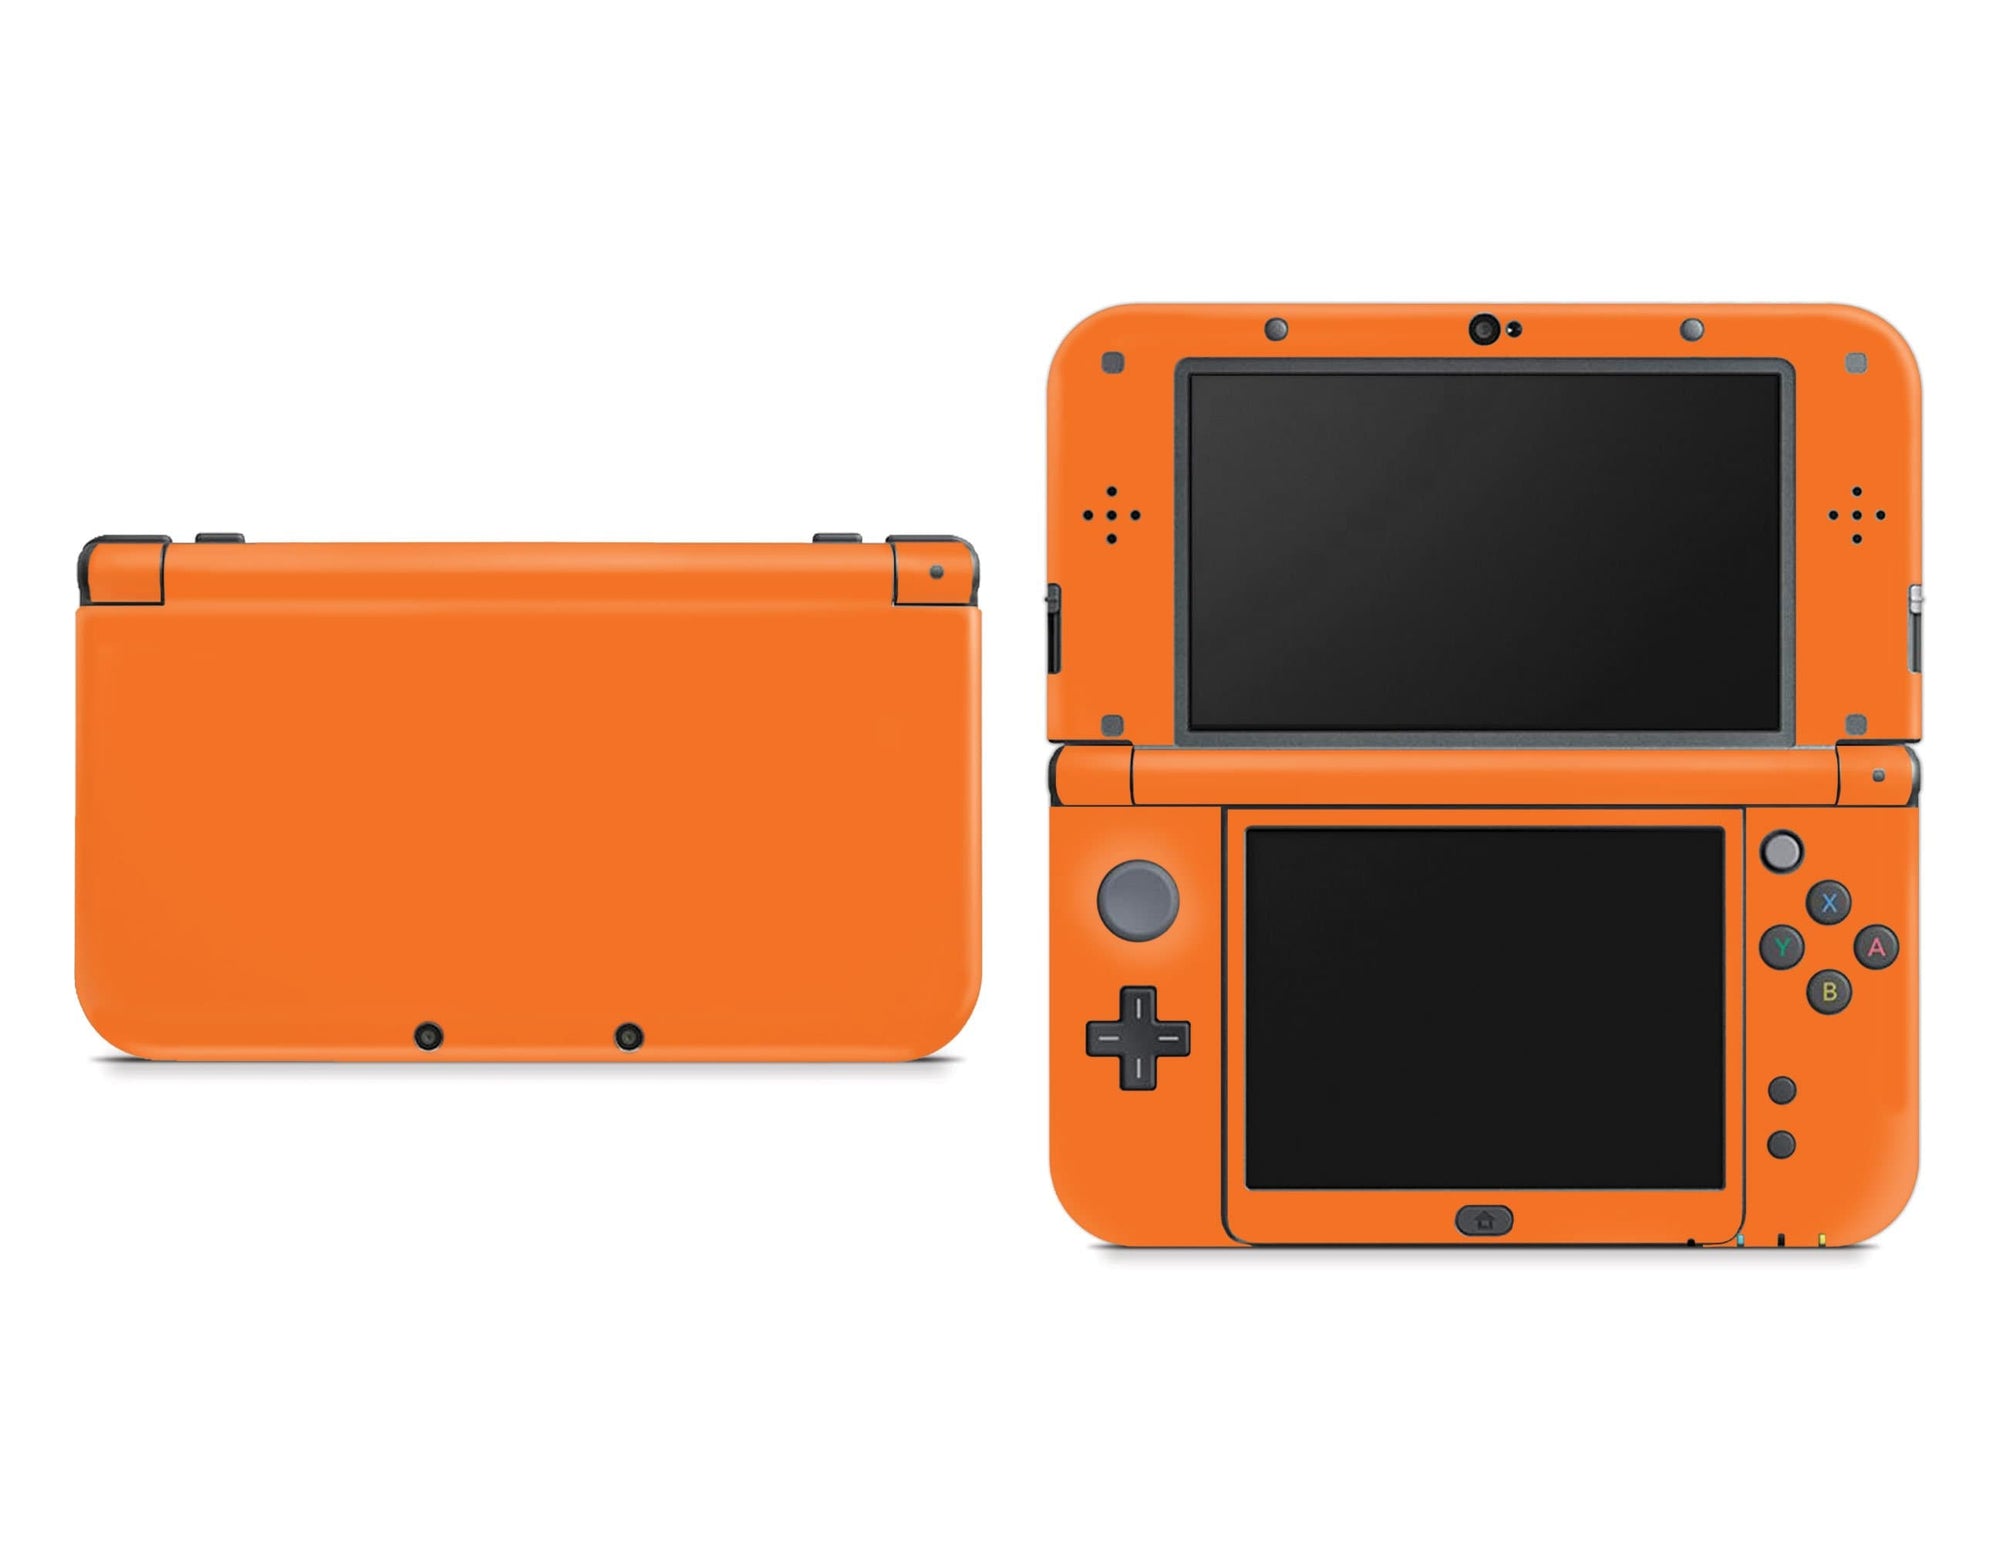 råd løst Rige Classic Solid Color Nintendo New 3DS XL Skin | Choose Your Color -  StickyBunny